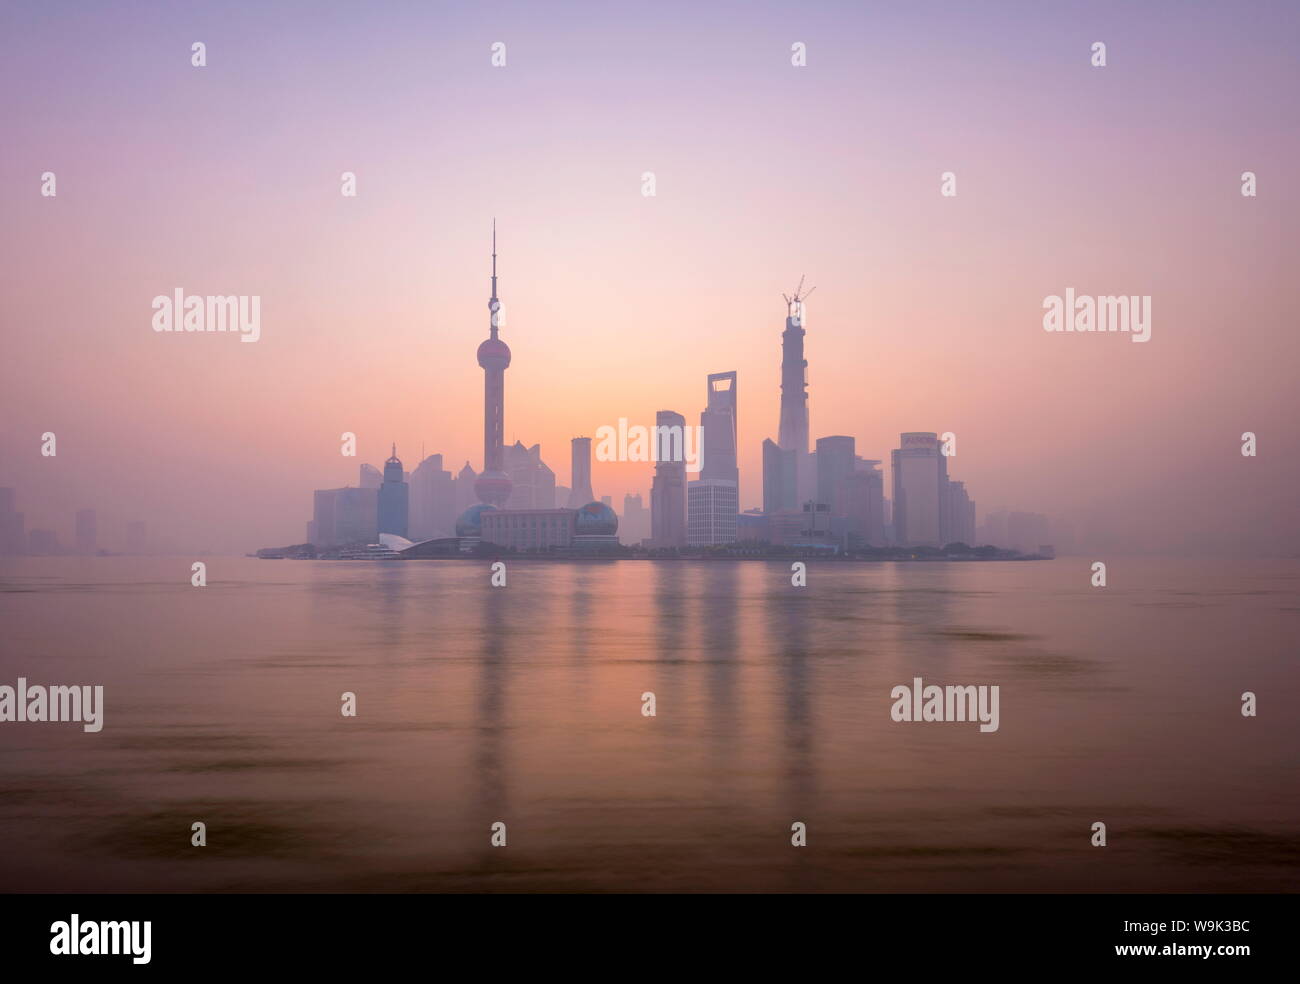 Pudong skyline across Huangpu River, including Oriental Pearl Tower, Shanghai World Financial Center, and Shanghai Tower, Shanghai, China, Asia Stock Photo